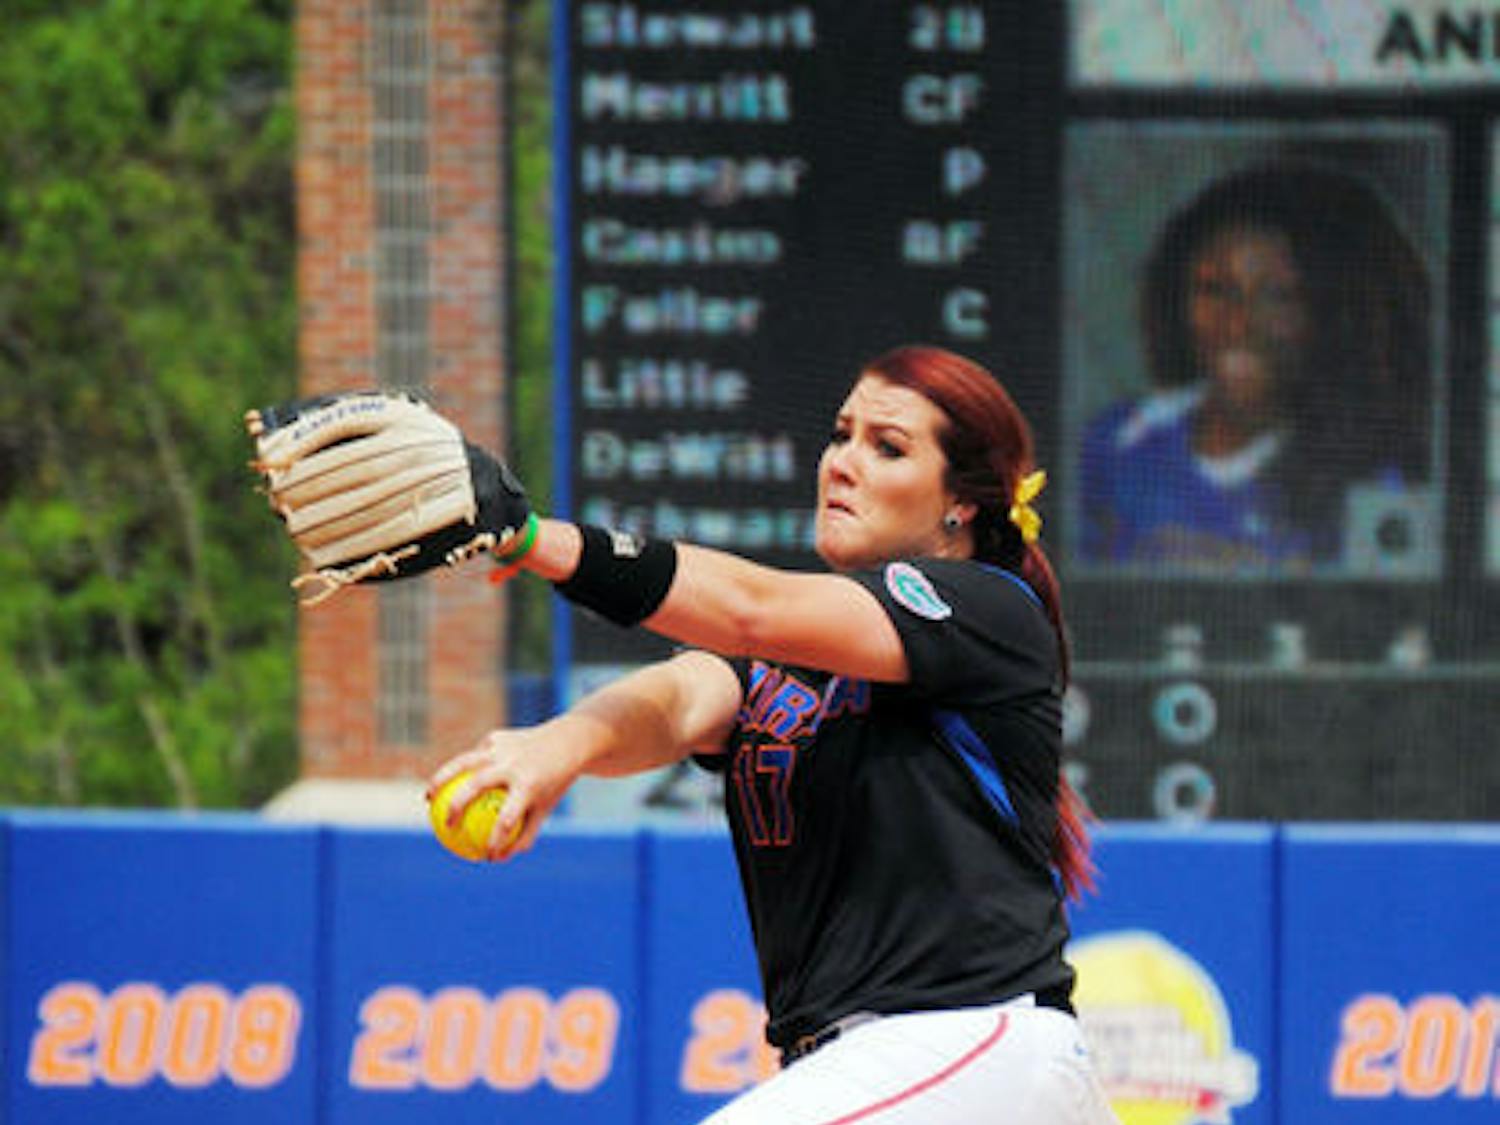 Lauren Haeger pitches during Florida's 14-10 loss to LSU on Mar. 14 at Katie Seashole Pressly Stadium.